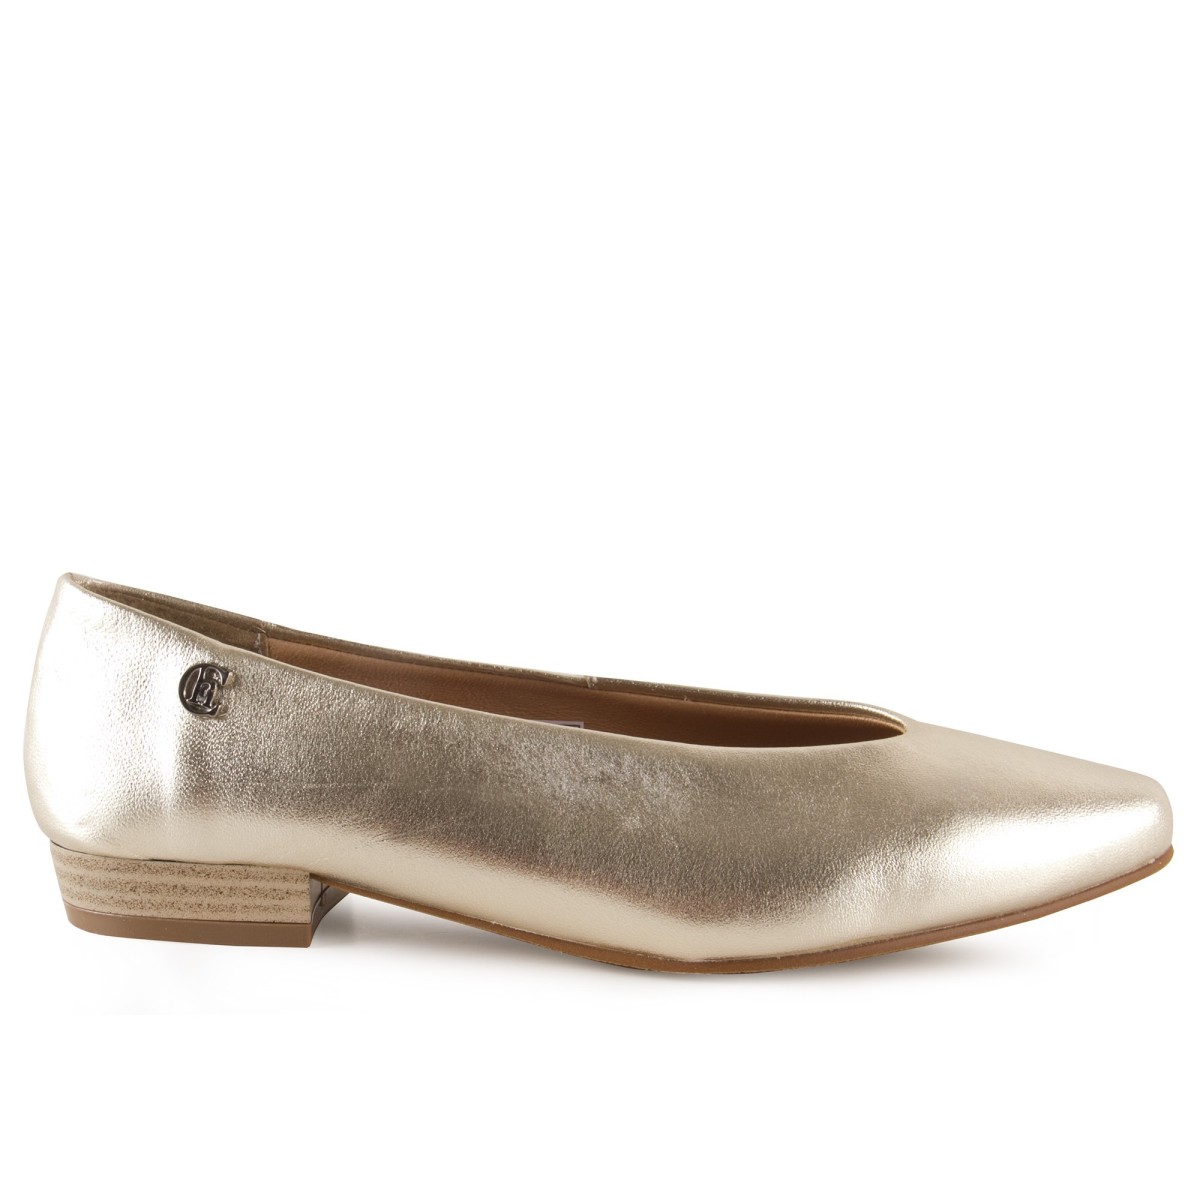 Gold leather ballerina pumps by Chamby